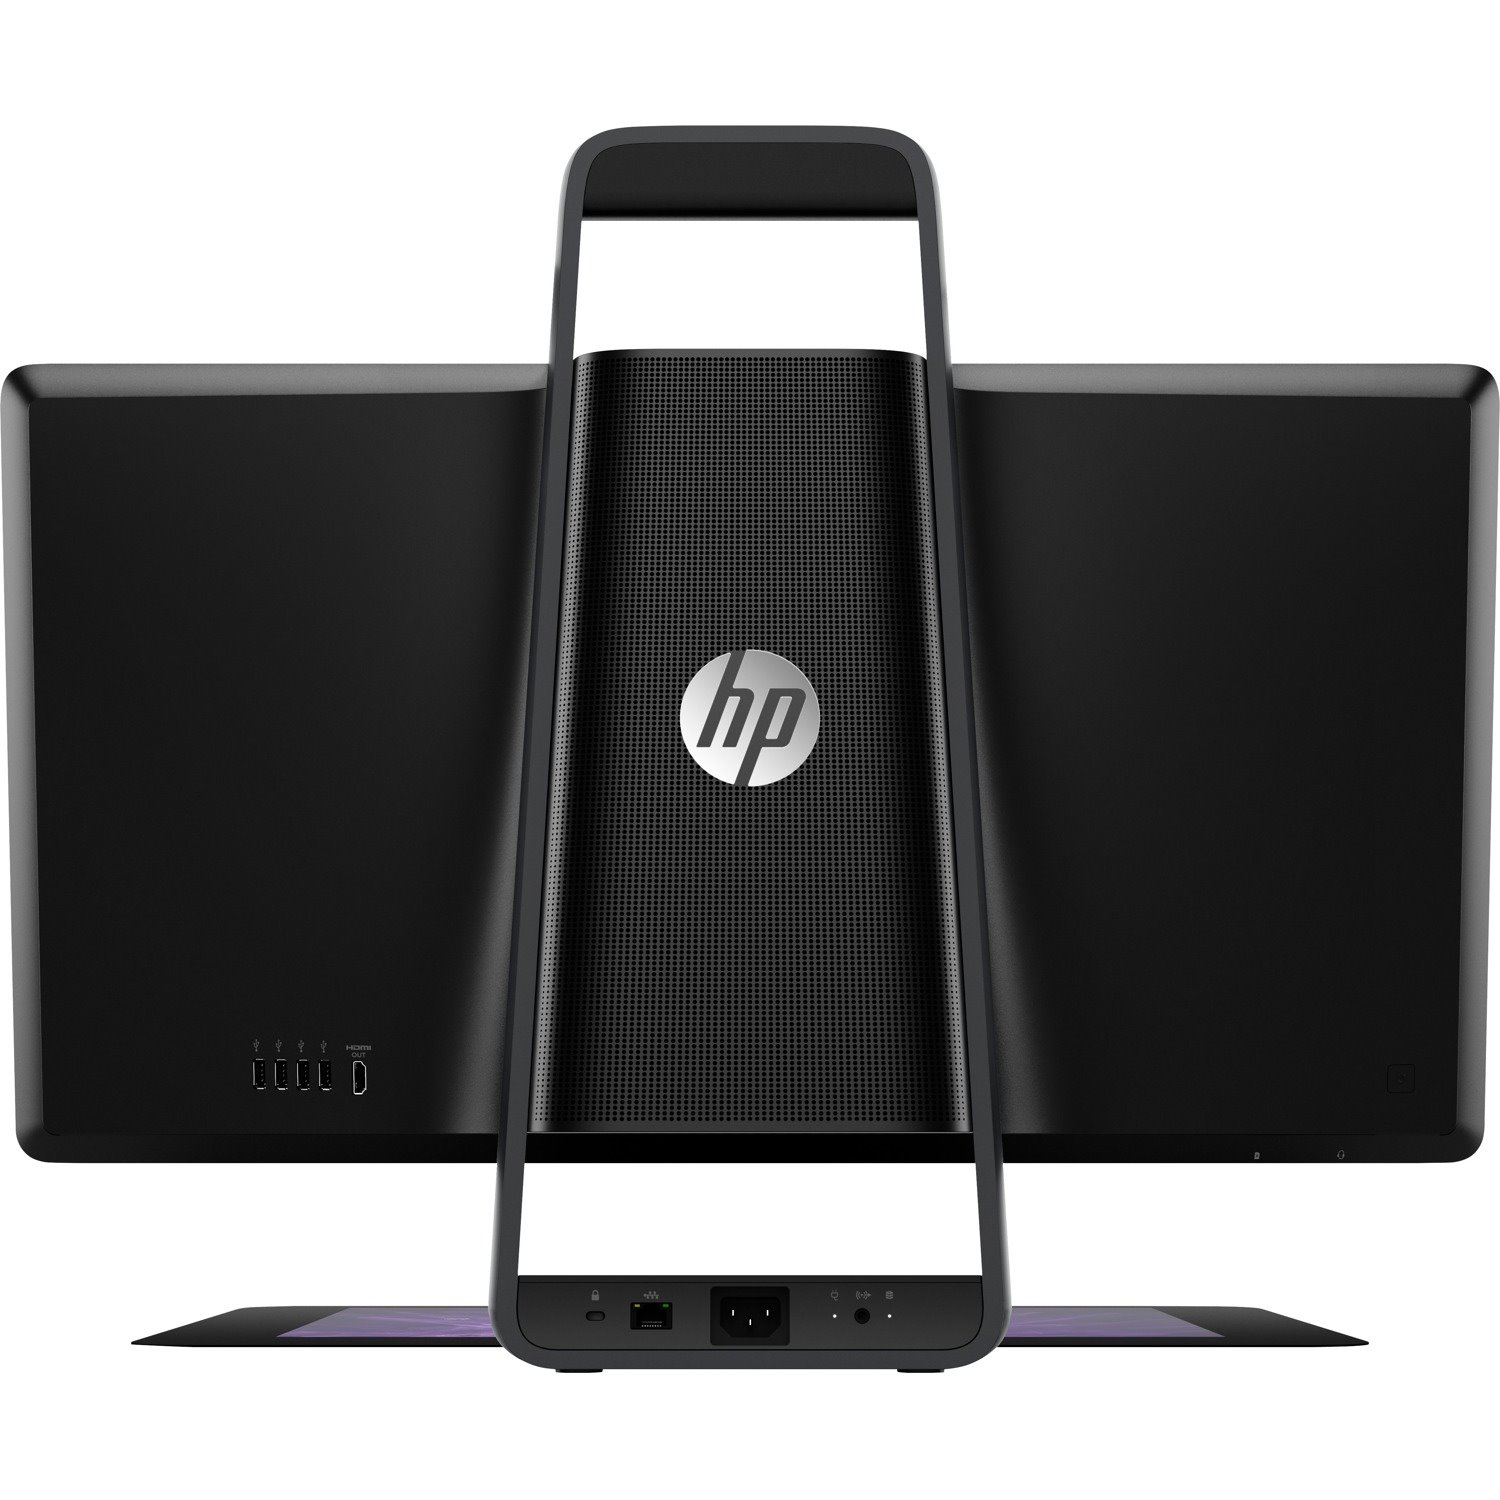 HP Sprout Pro G2 All-in-One Computer - Intel Core i7 7th Gen i7-7700T 2.90 GHz - 16 GB RAM DDR4 SDRAM - 512 GB SSD - 23.8" 1920 x 1080 Touchscreen Display - Desktop - Black